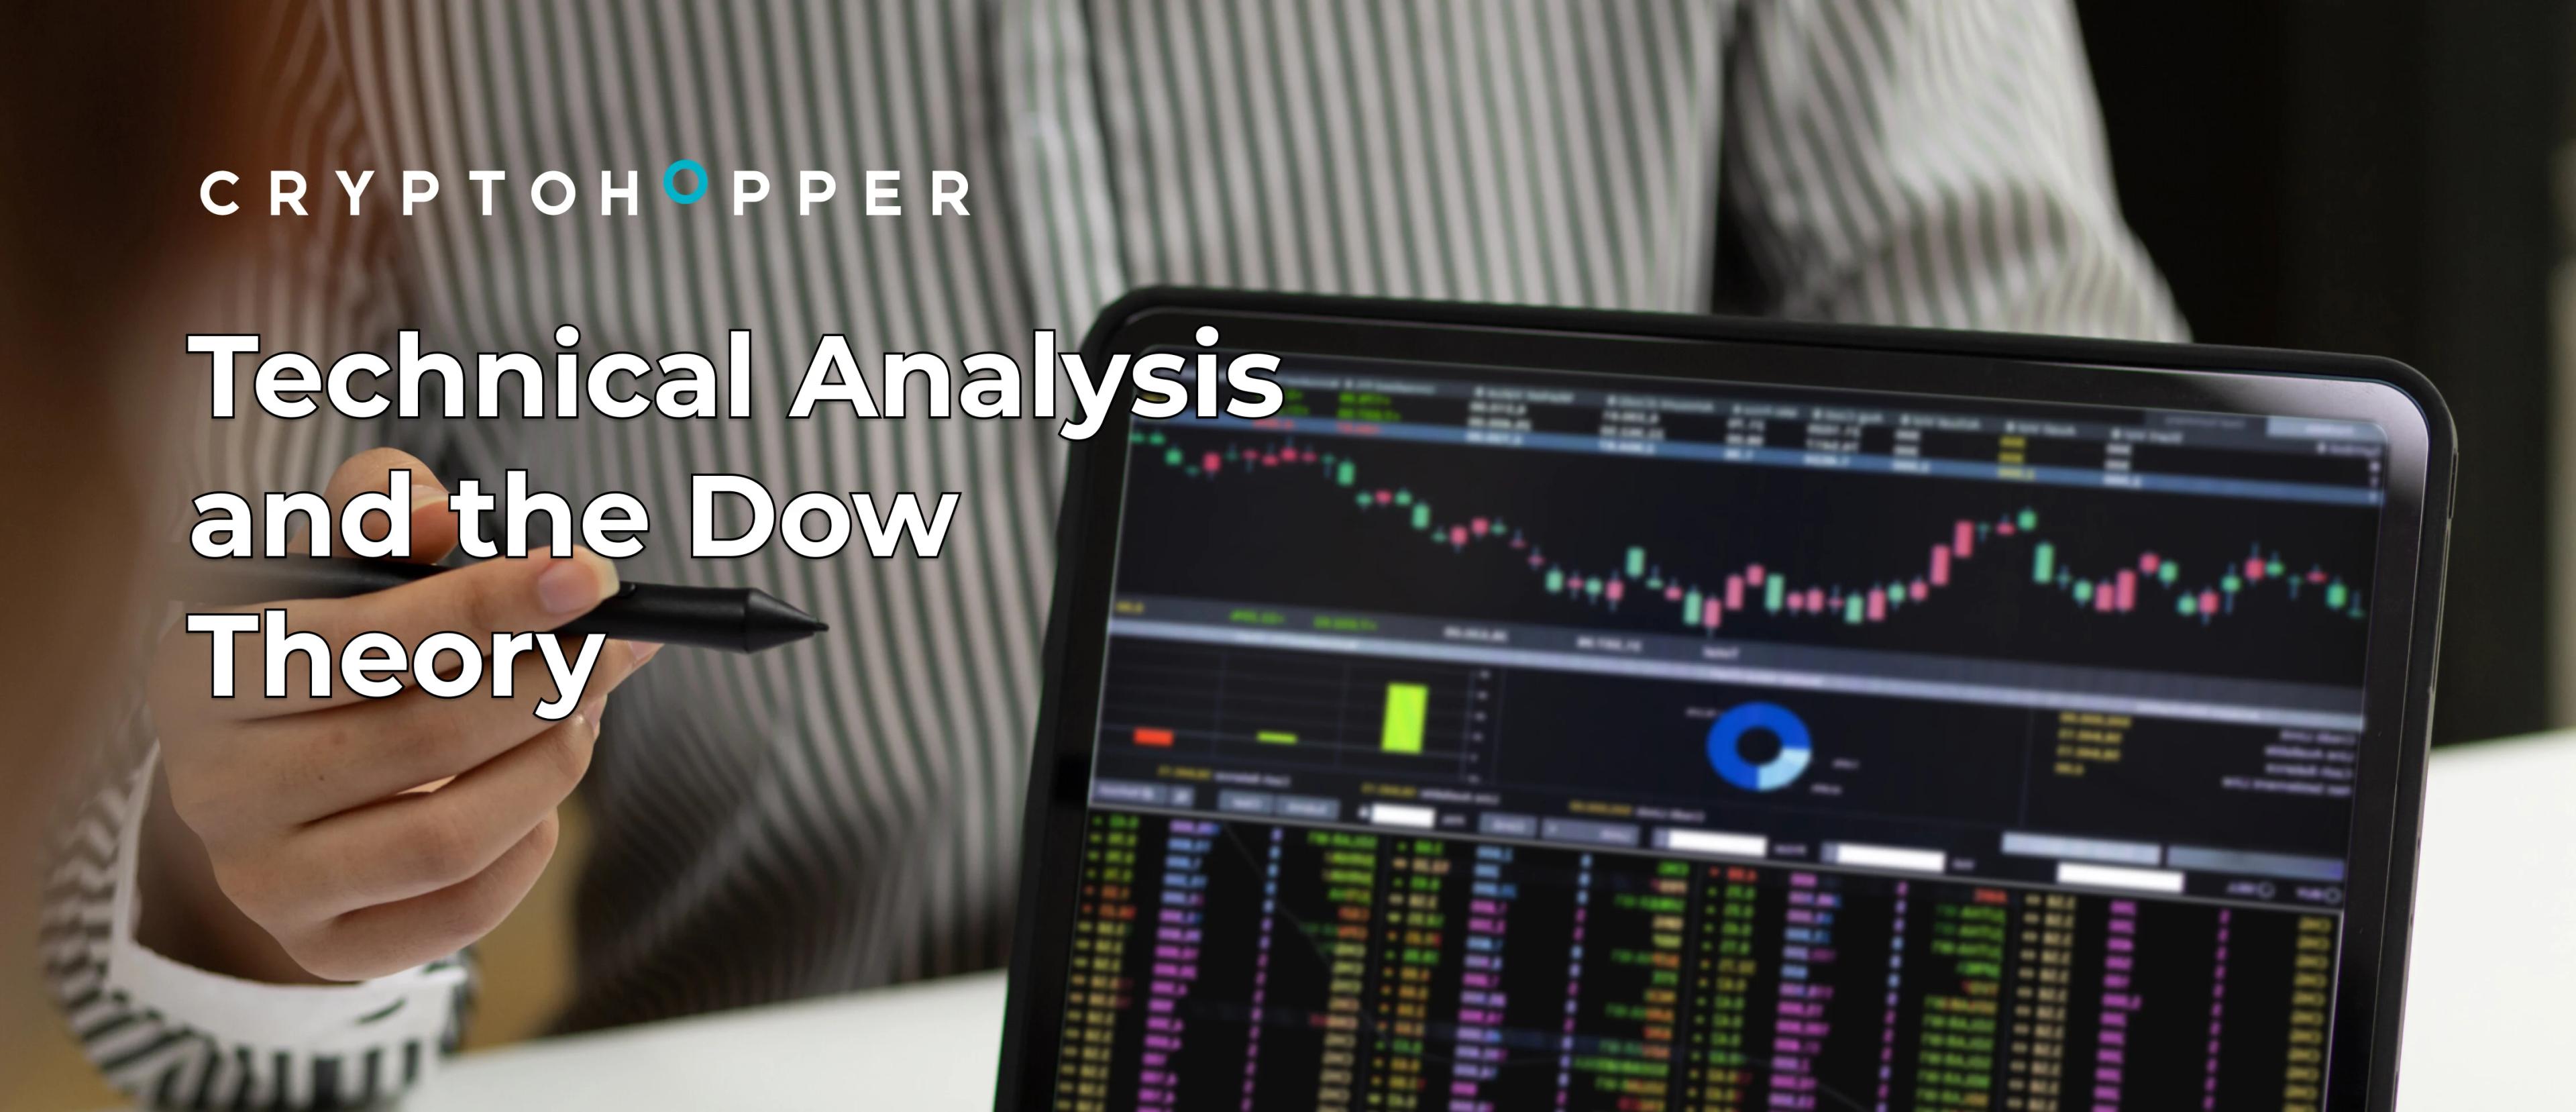 Technical Analysis and the Dow Theory